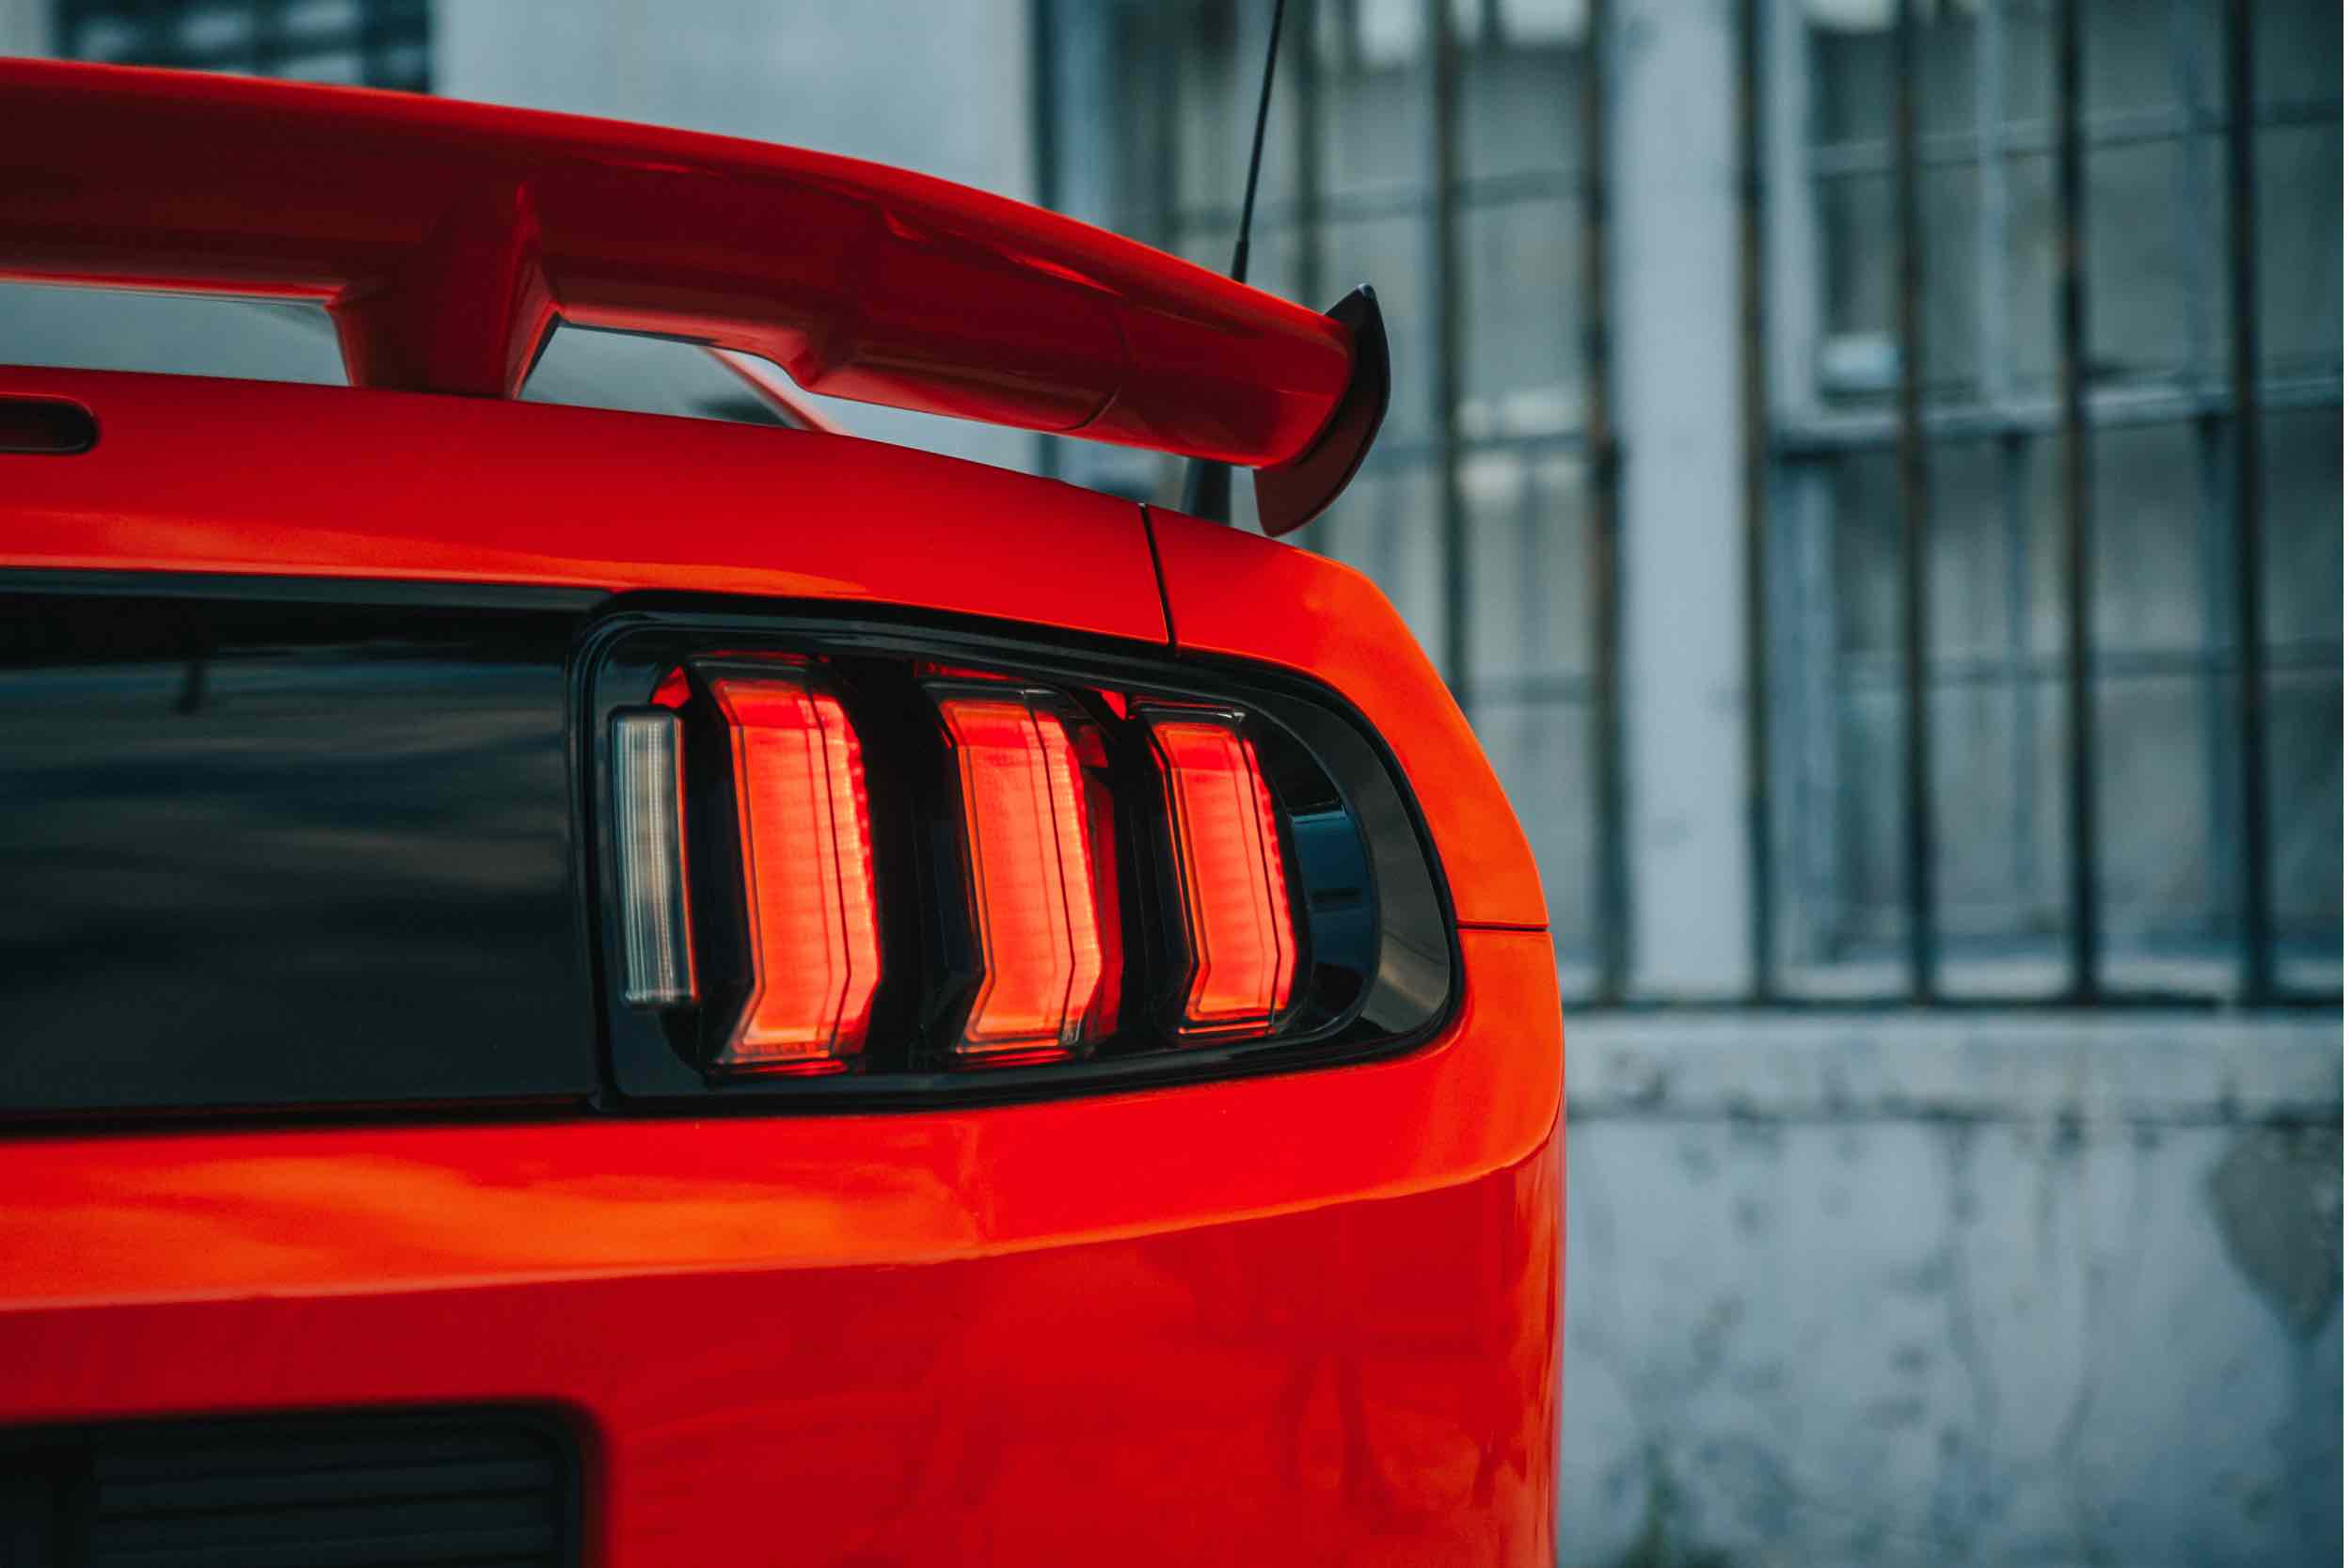 Ford Mustang (10-12) (Pair / Facelift / Smoked): Morimoto XB LED Tails-LF442.2